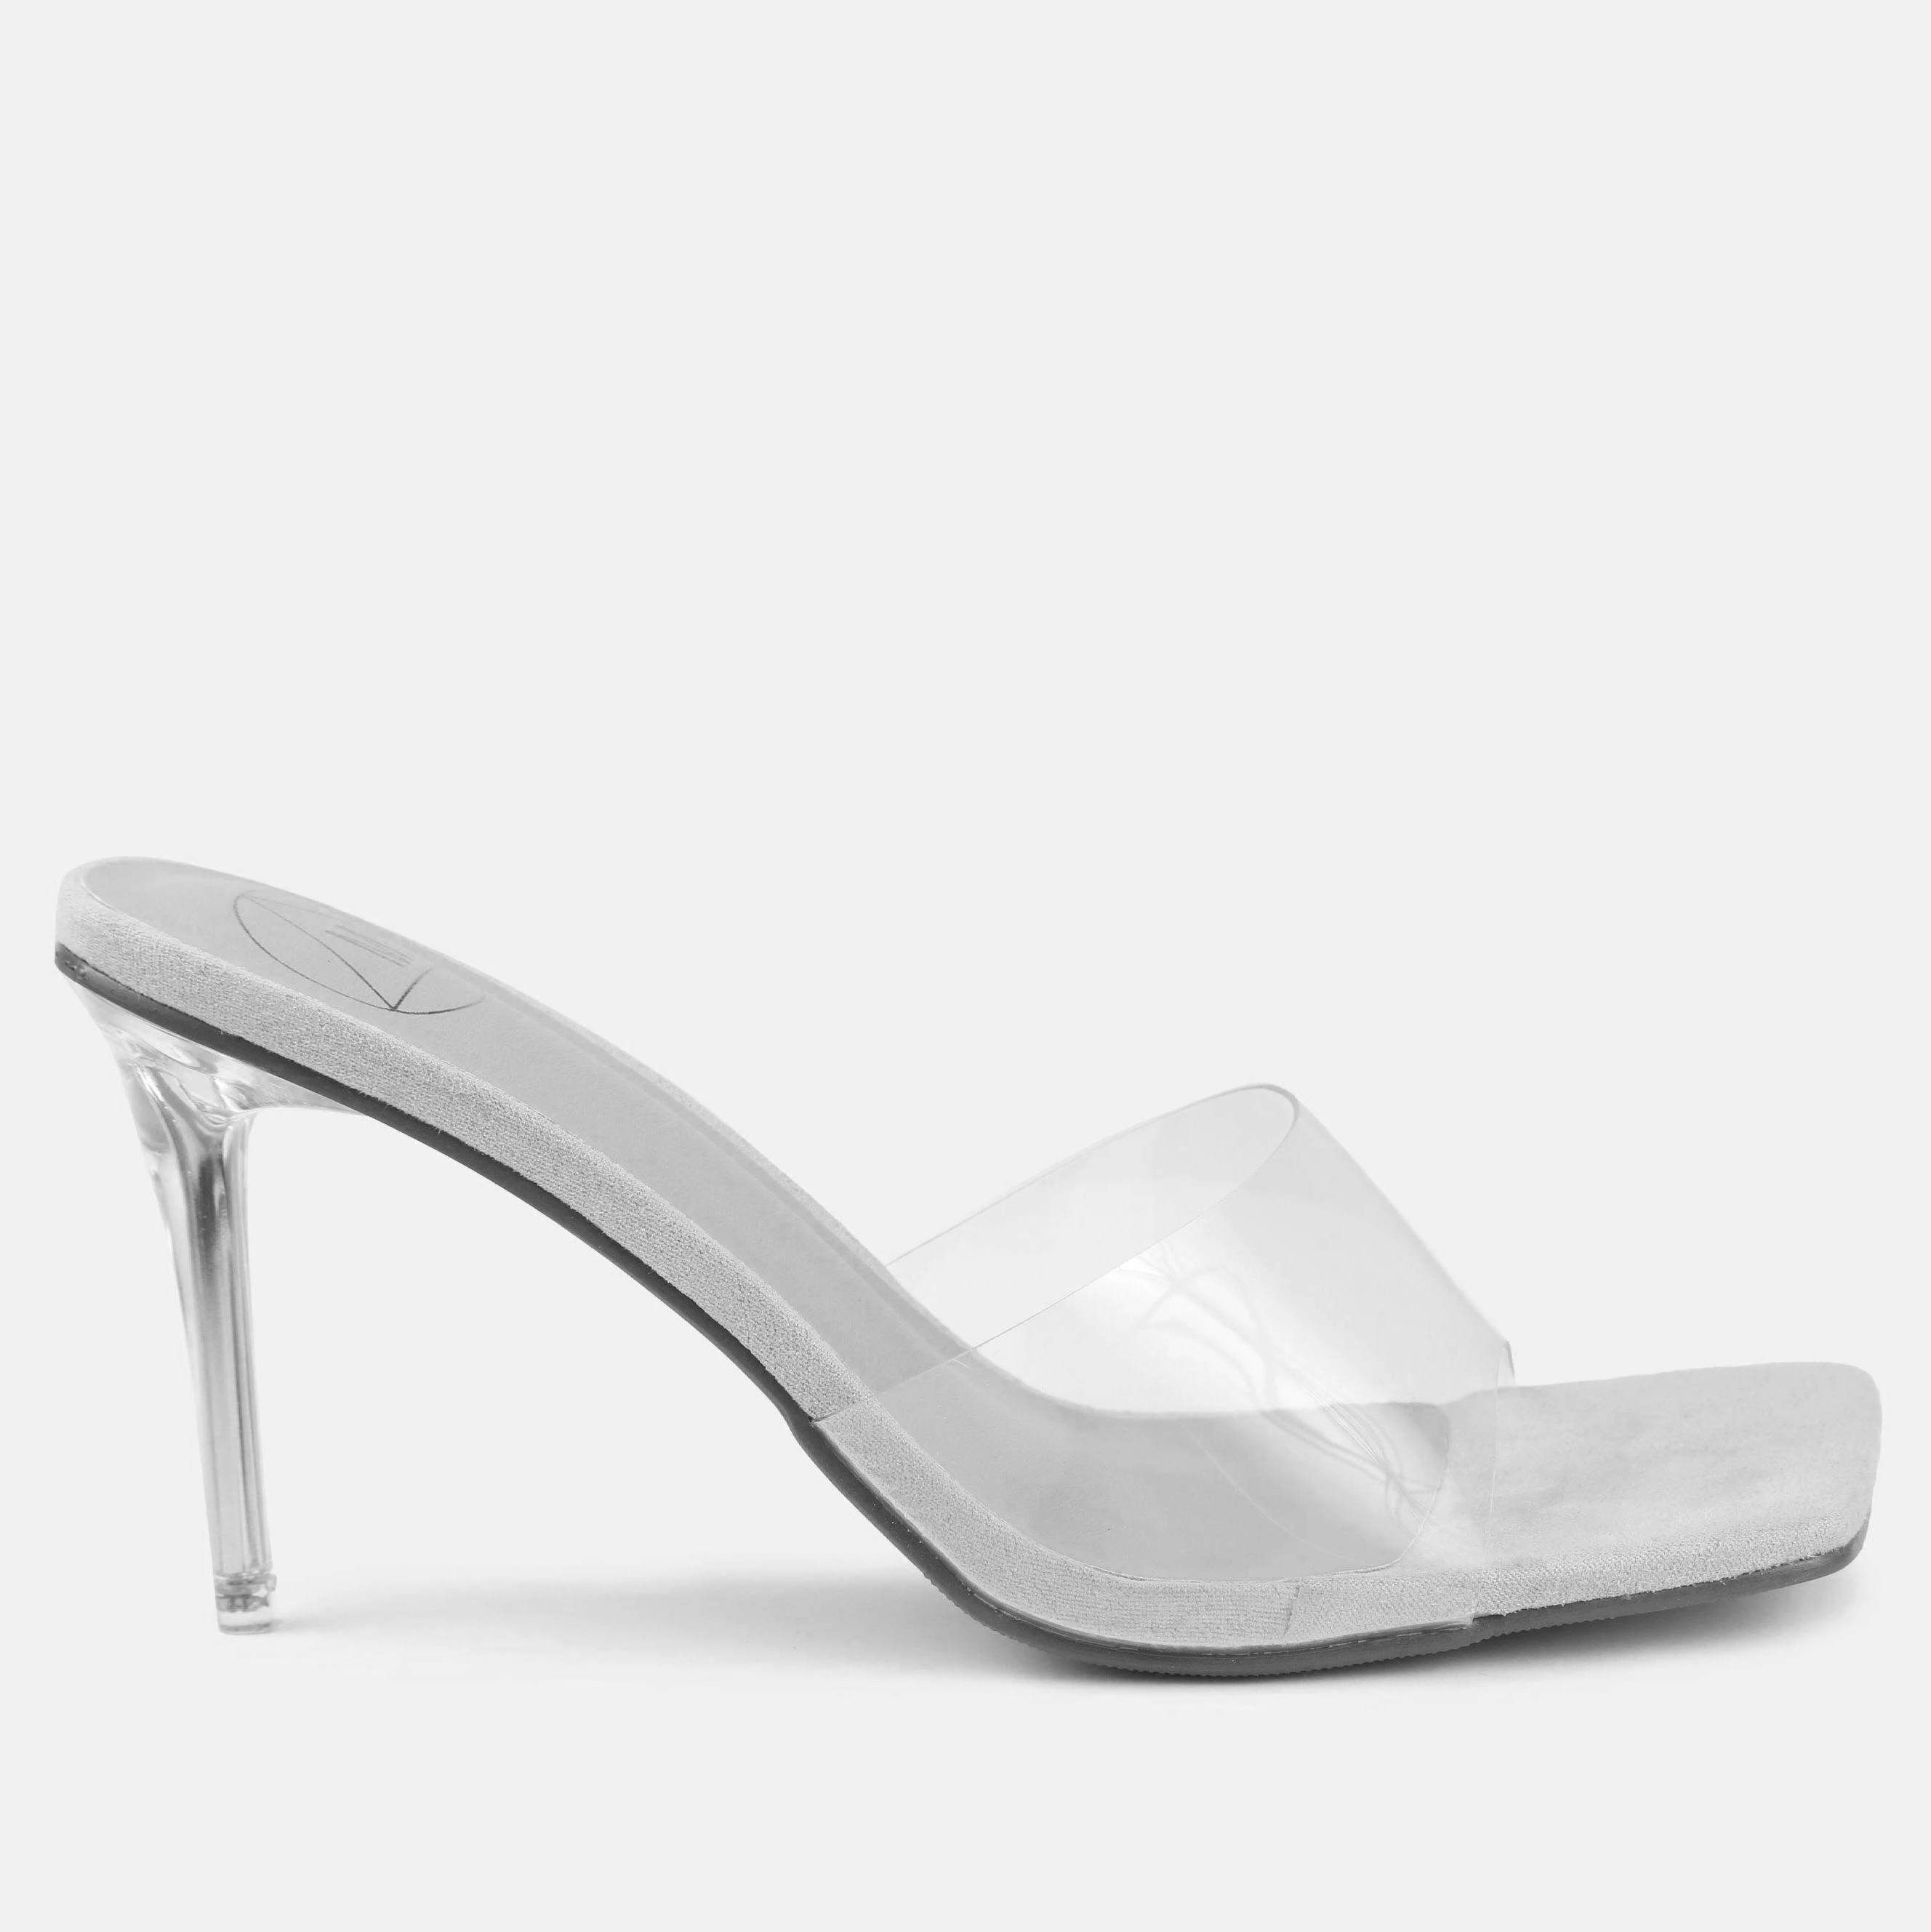 Bridal Bliss is Just Steps Away with these Silver Wedding Shoes